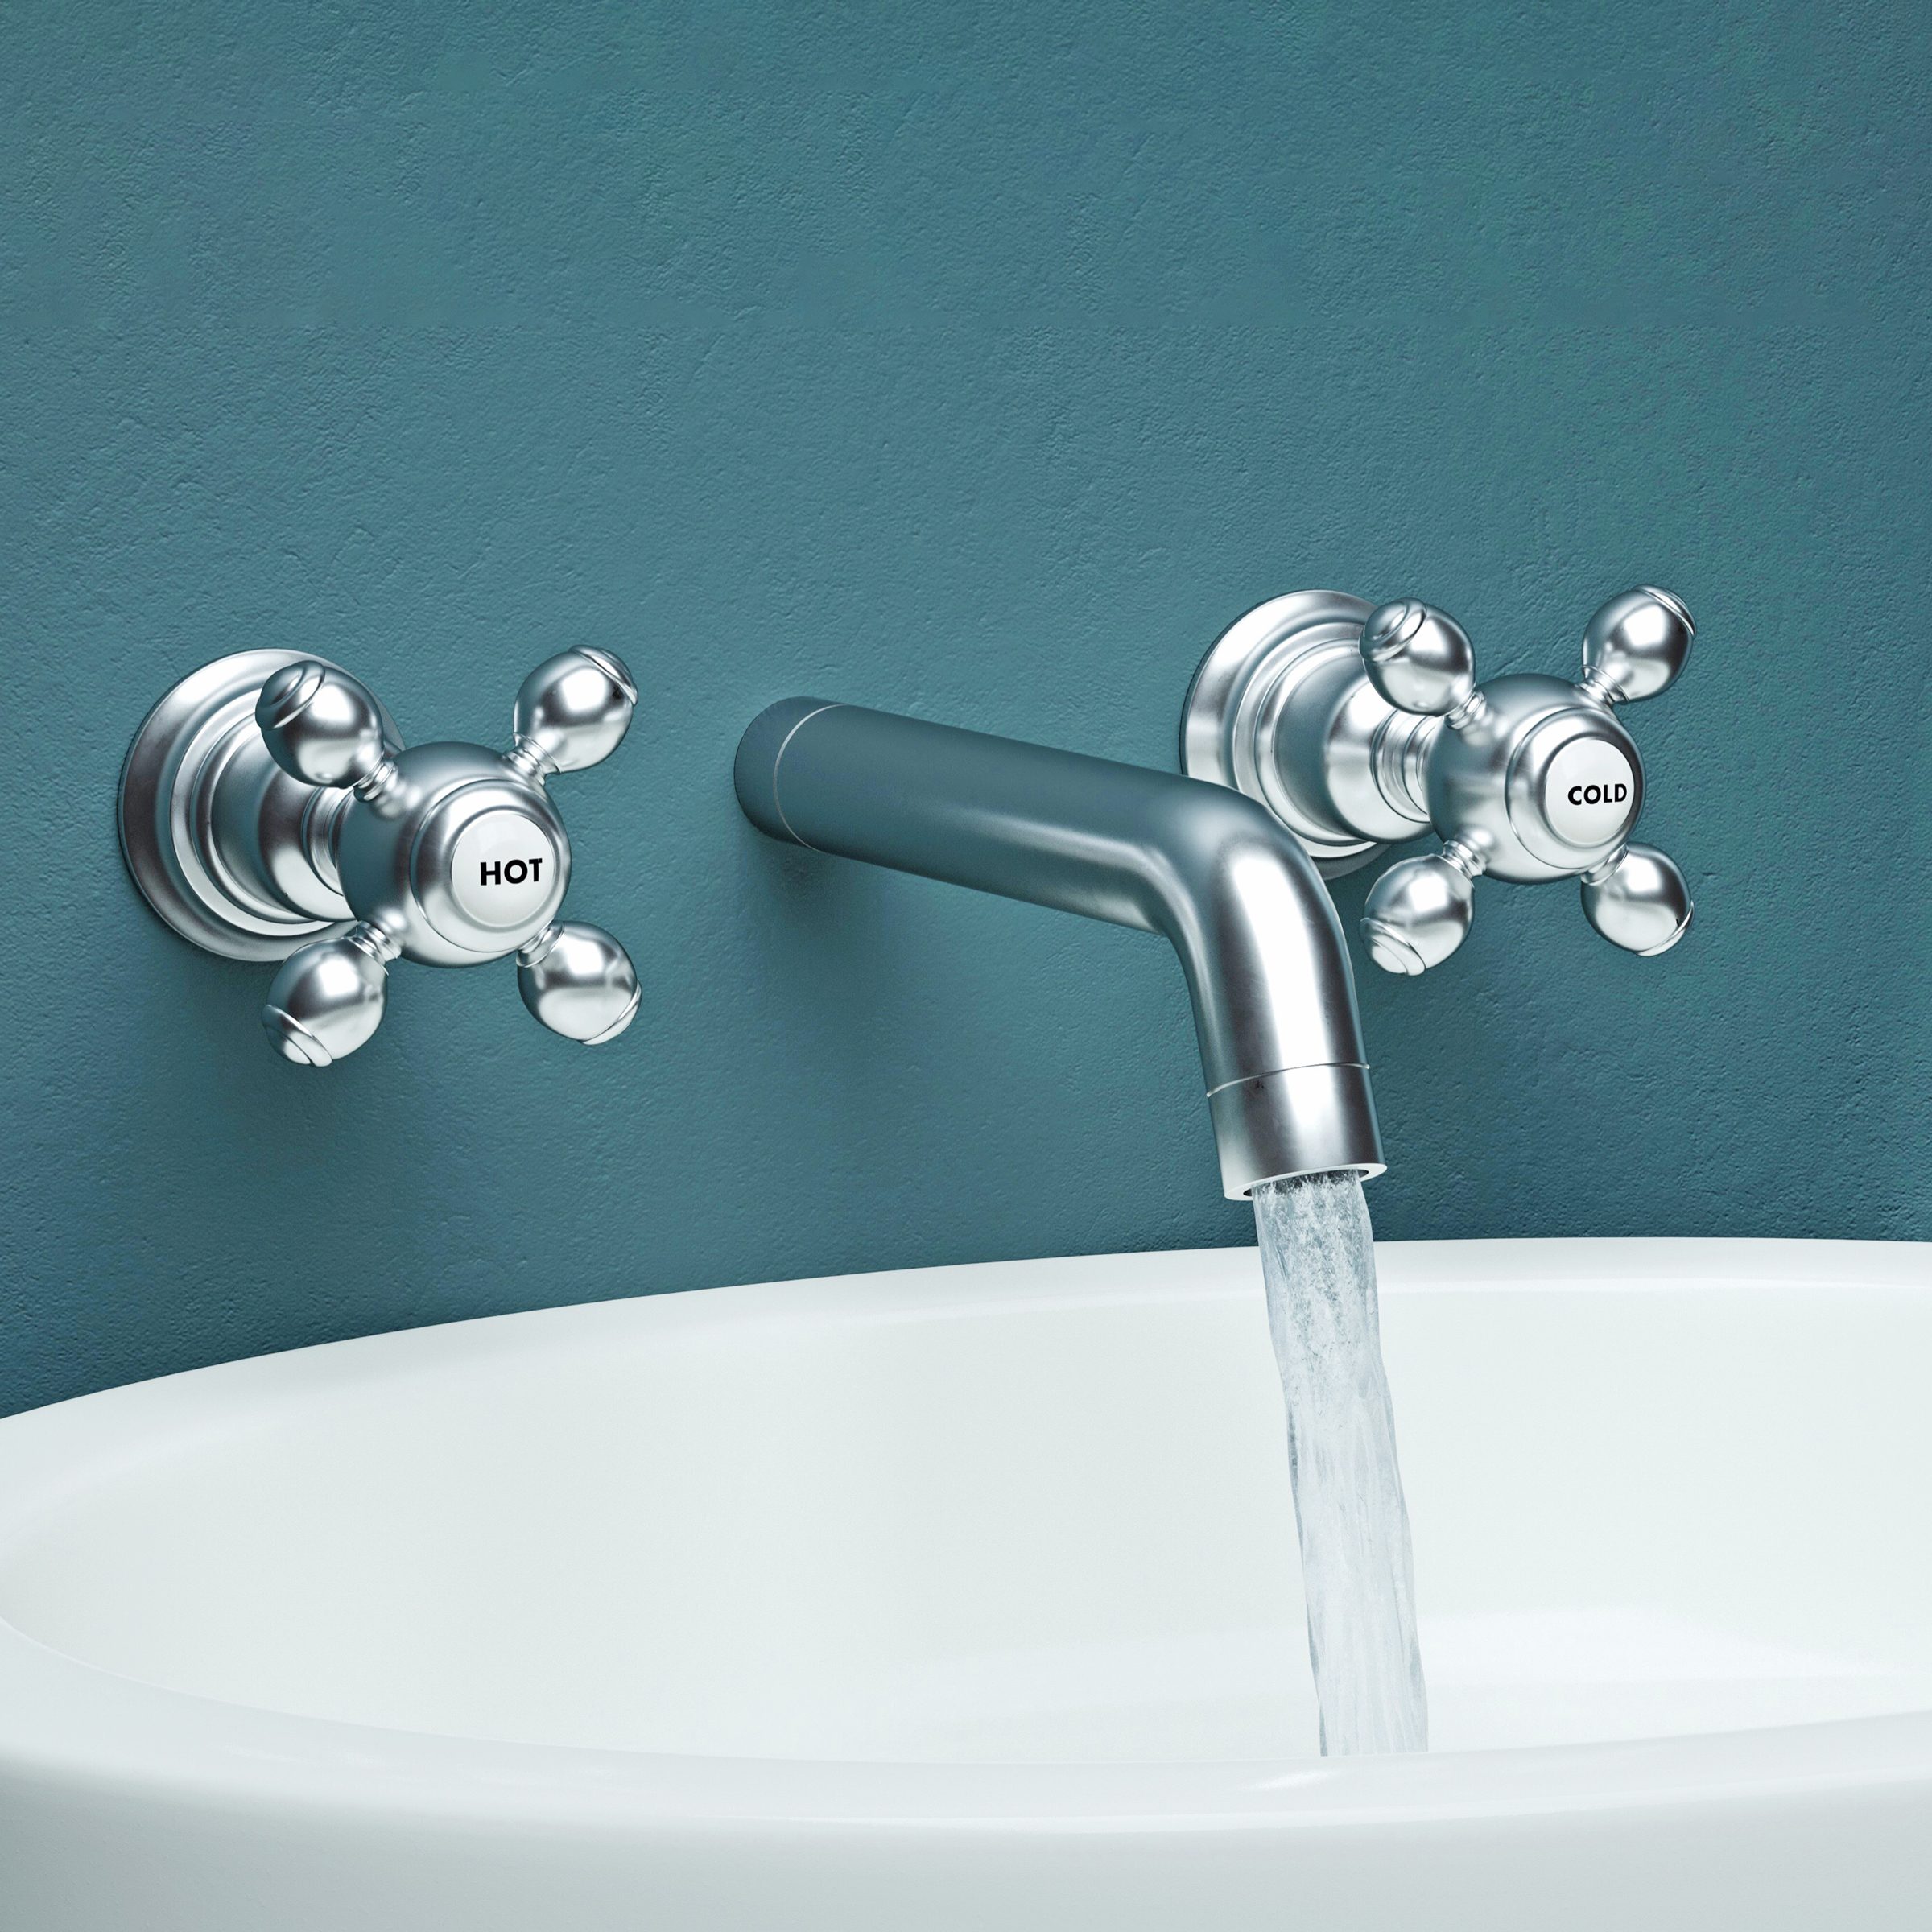 What To Know About Wall-Mounted Bathroom Faucets